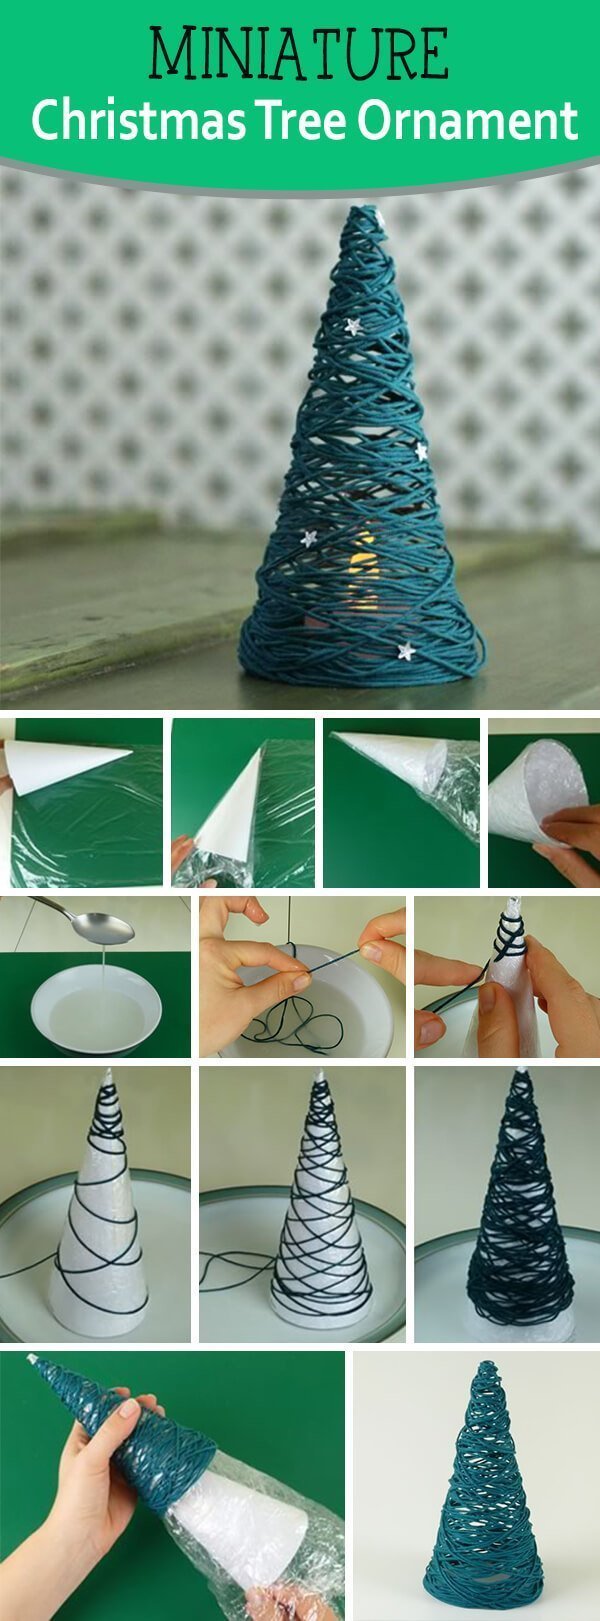 Quick and Simple Christmas Tree Ornament